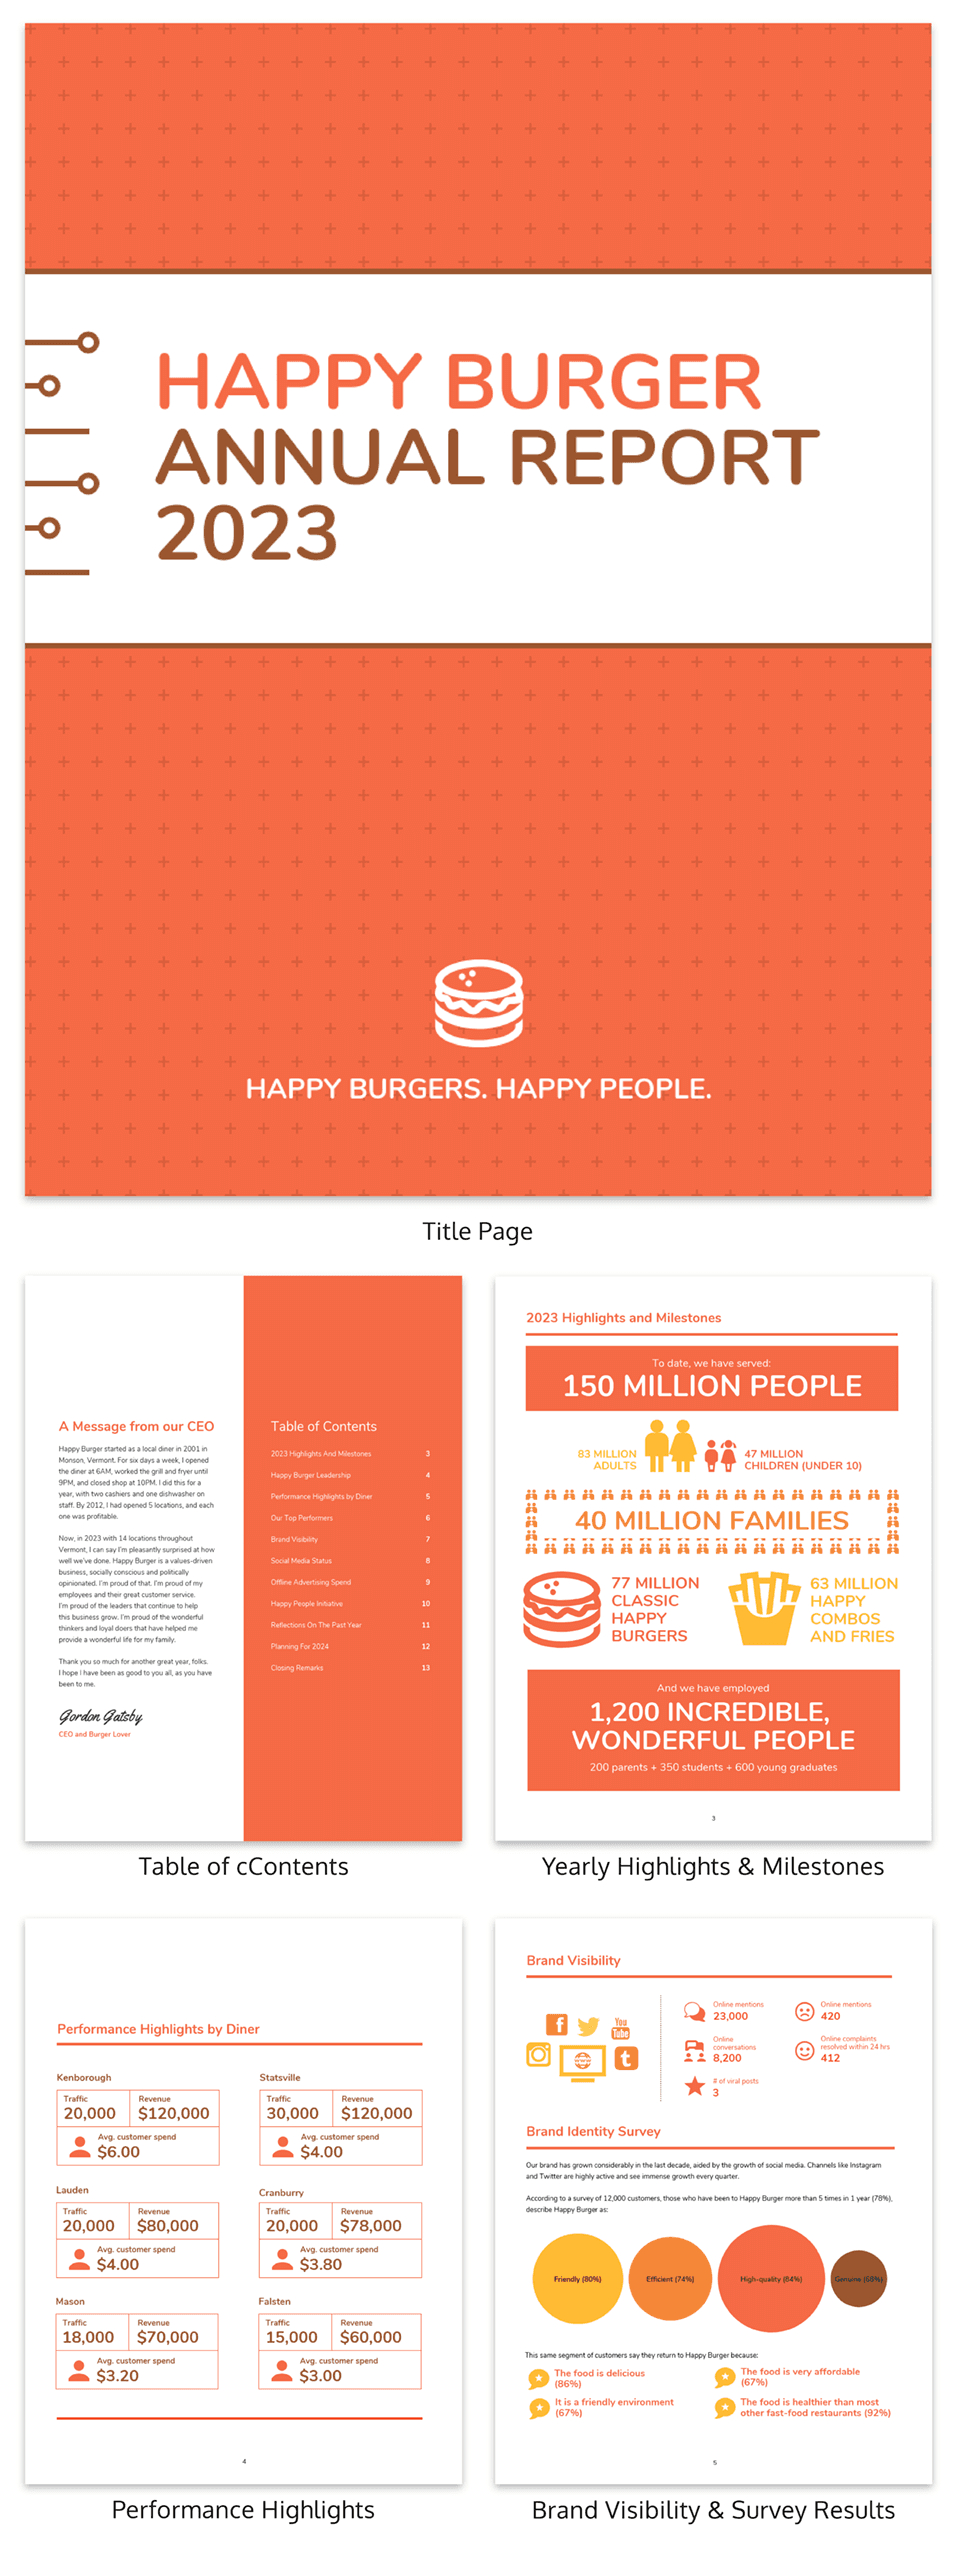 55+ Annual Report Design Templates & Inspirational Examples Intended For Hr Annual Report Template